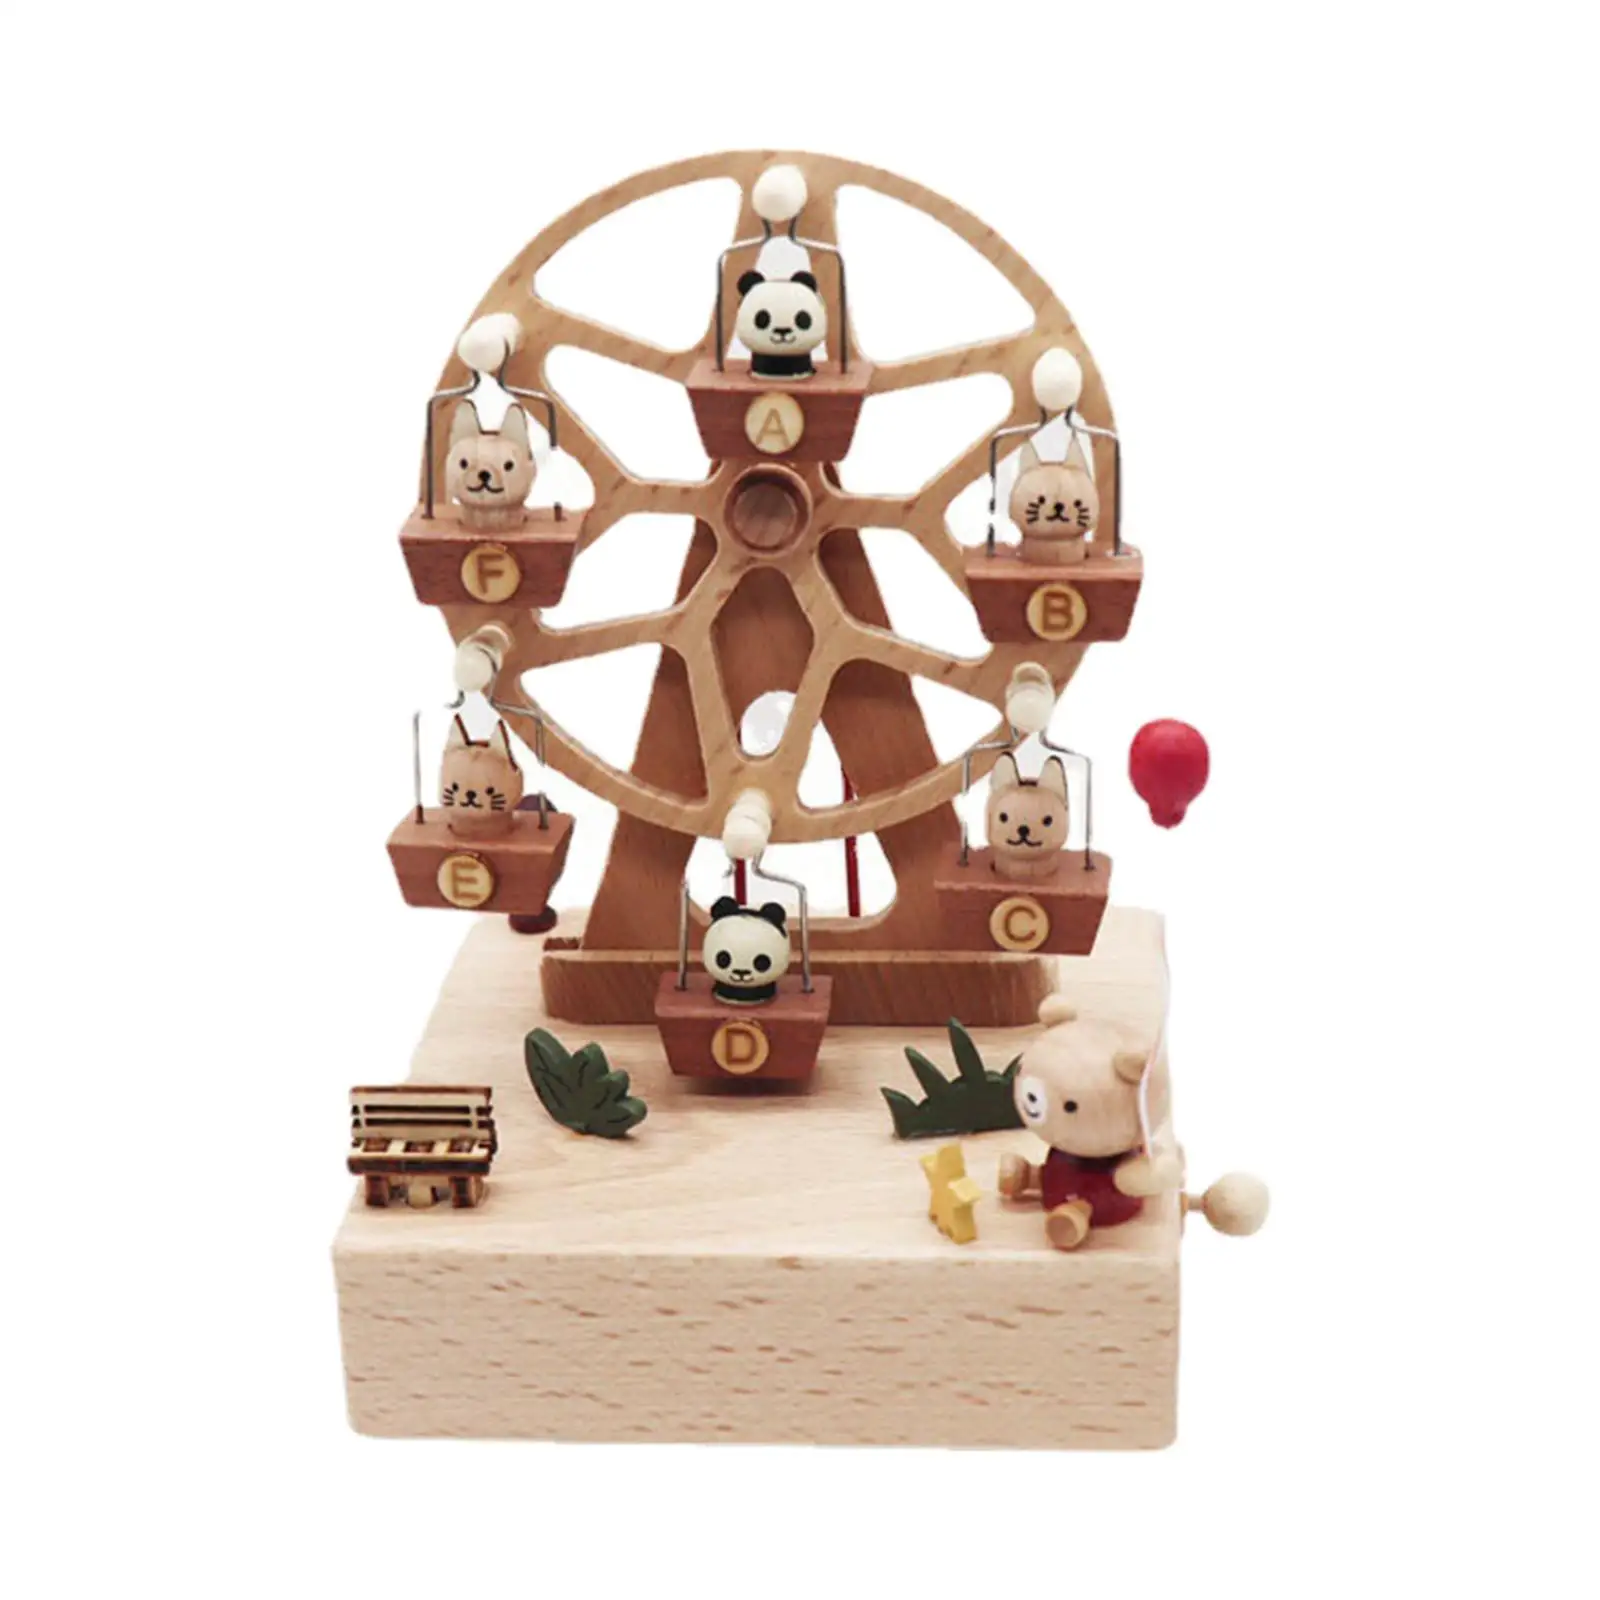 Carousel Music Box Ornament Children`s Toys Christmas Present for Family Friends with Small Swinging Animal Windmill Music Box